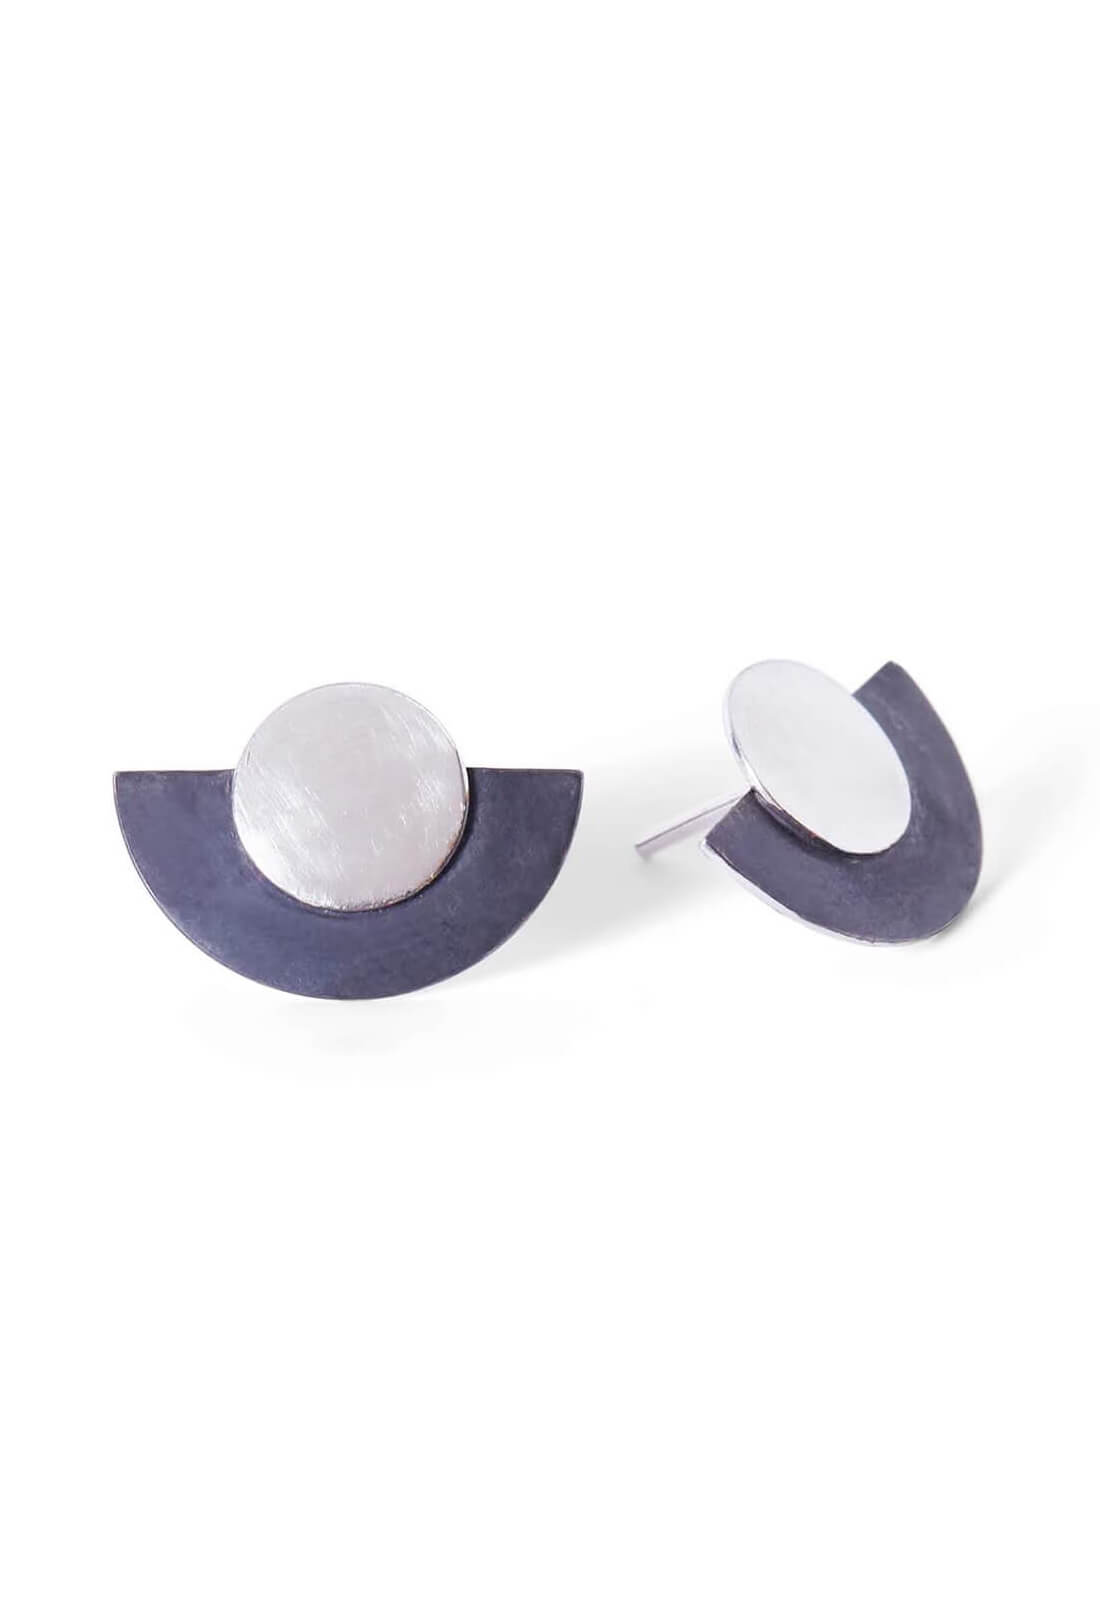 Handcrafted Disk and Dot Stud Earrings, Silver and Black